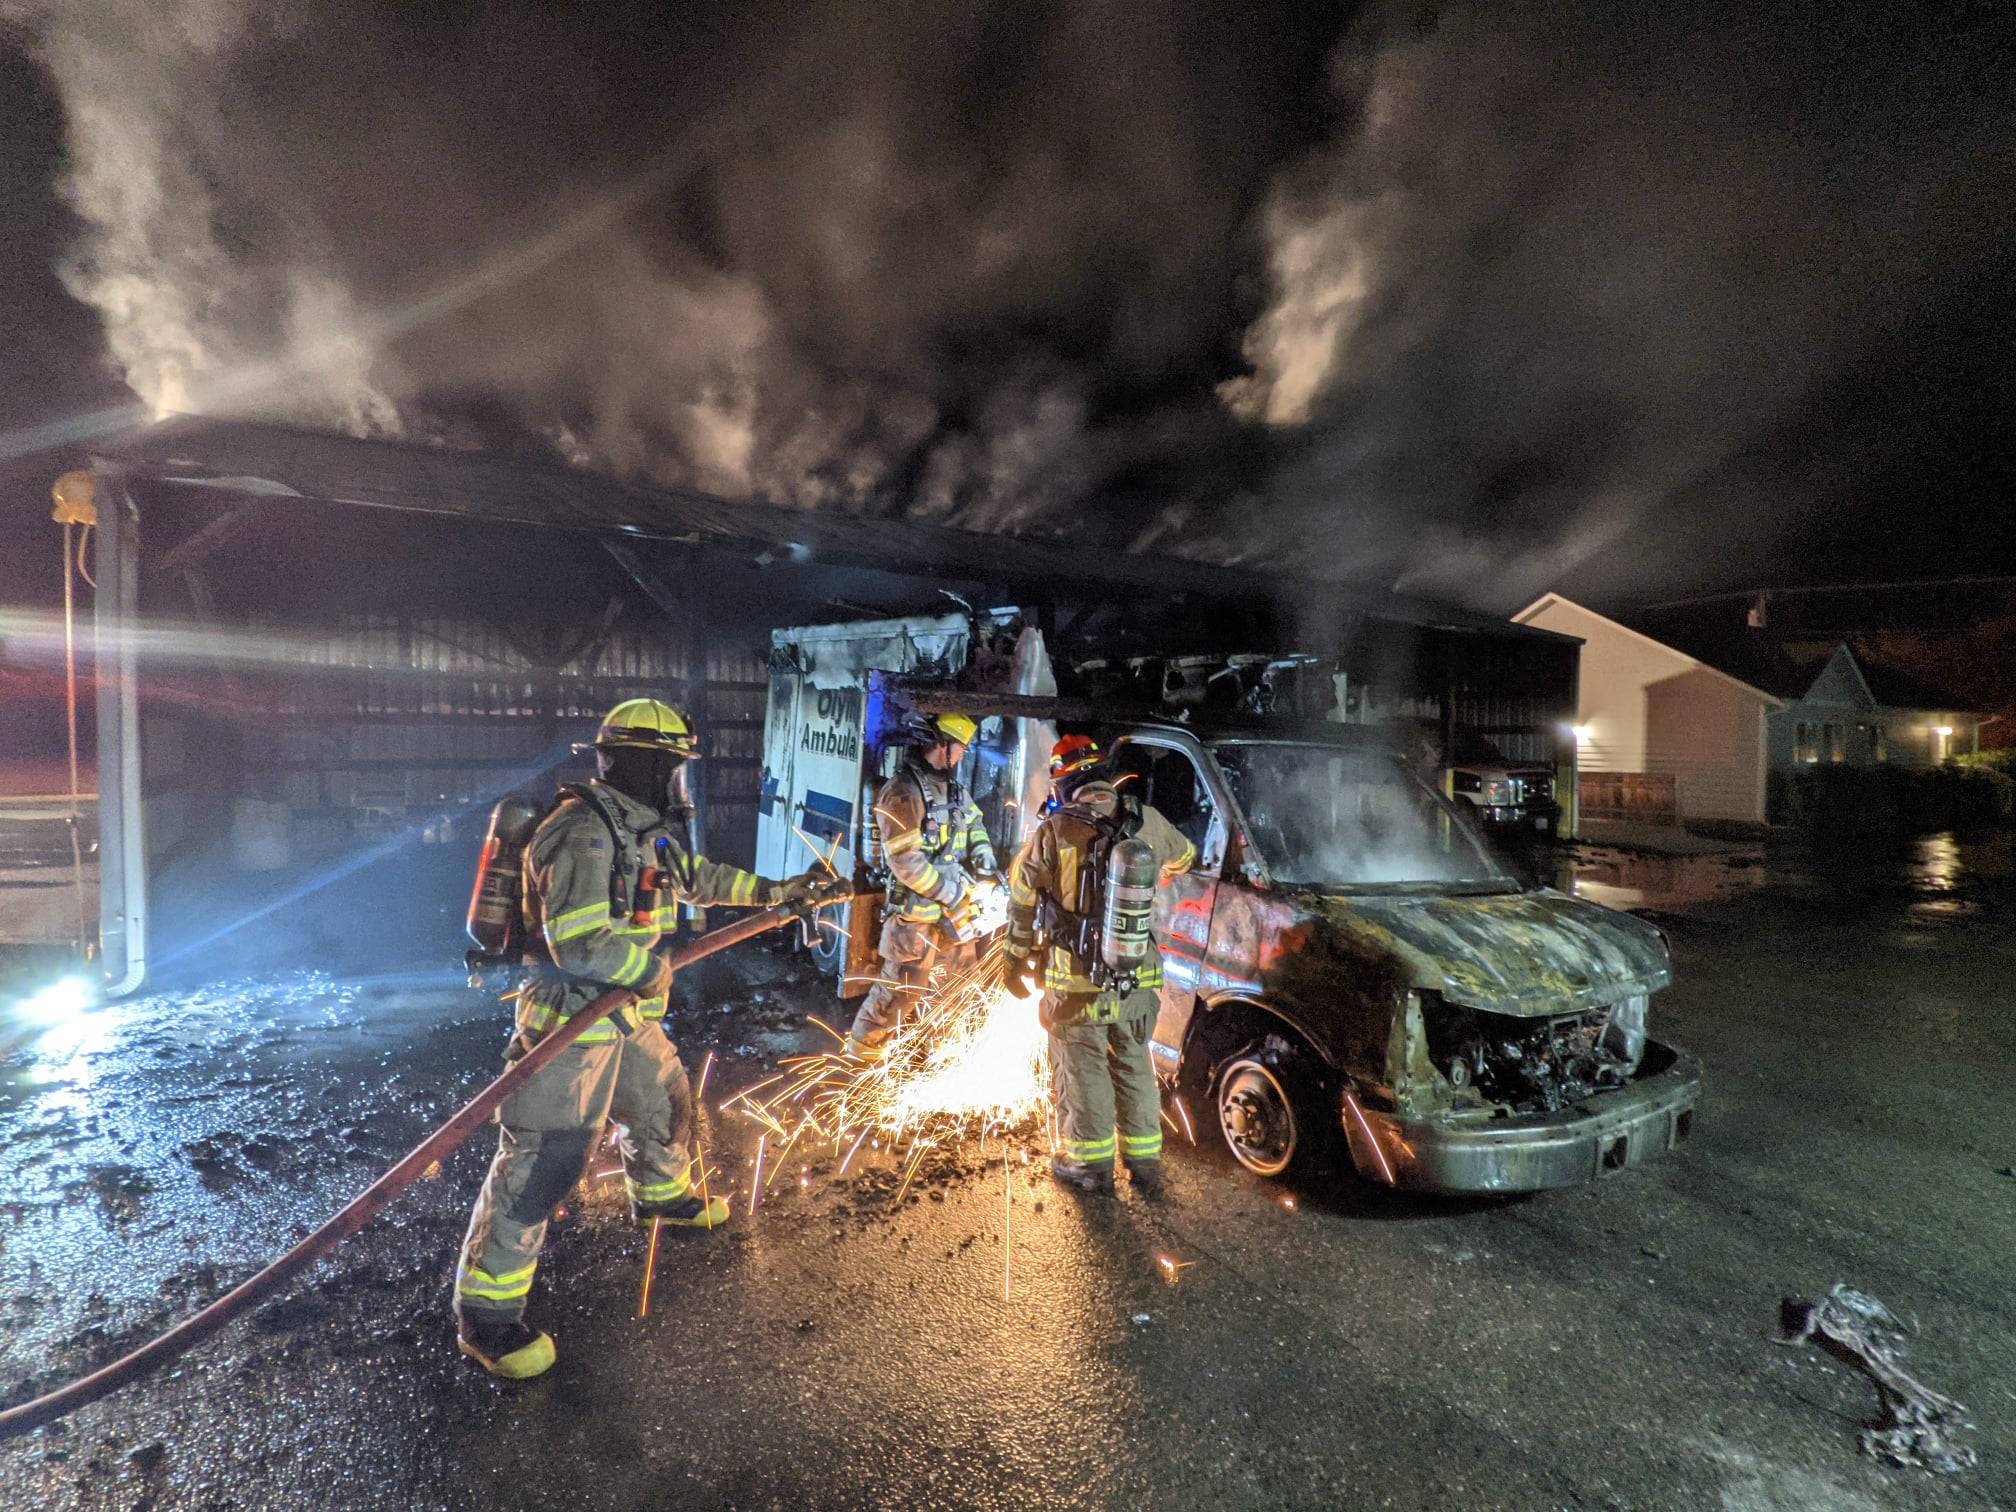 Firefighters respond to an early-morning fire at Olympic Ambulance on July 13. Photo courtesy of Clallam County Fire District 3